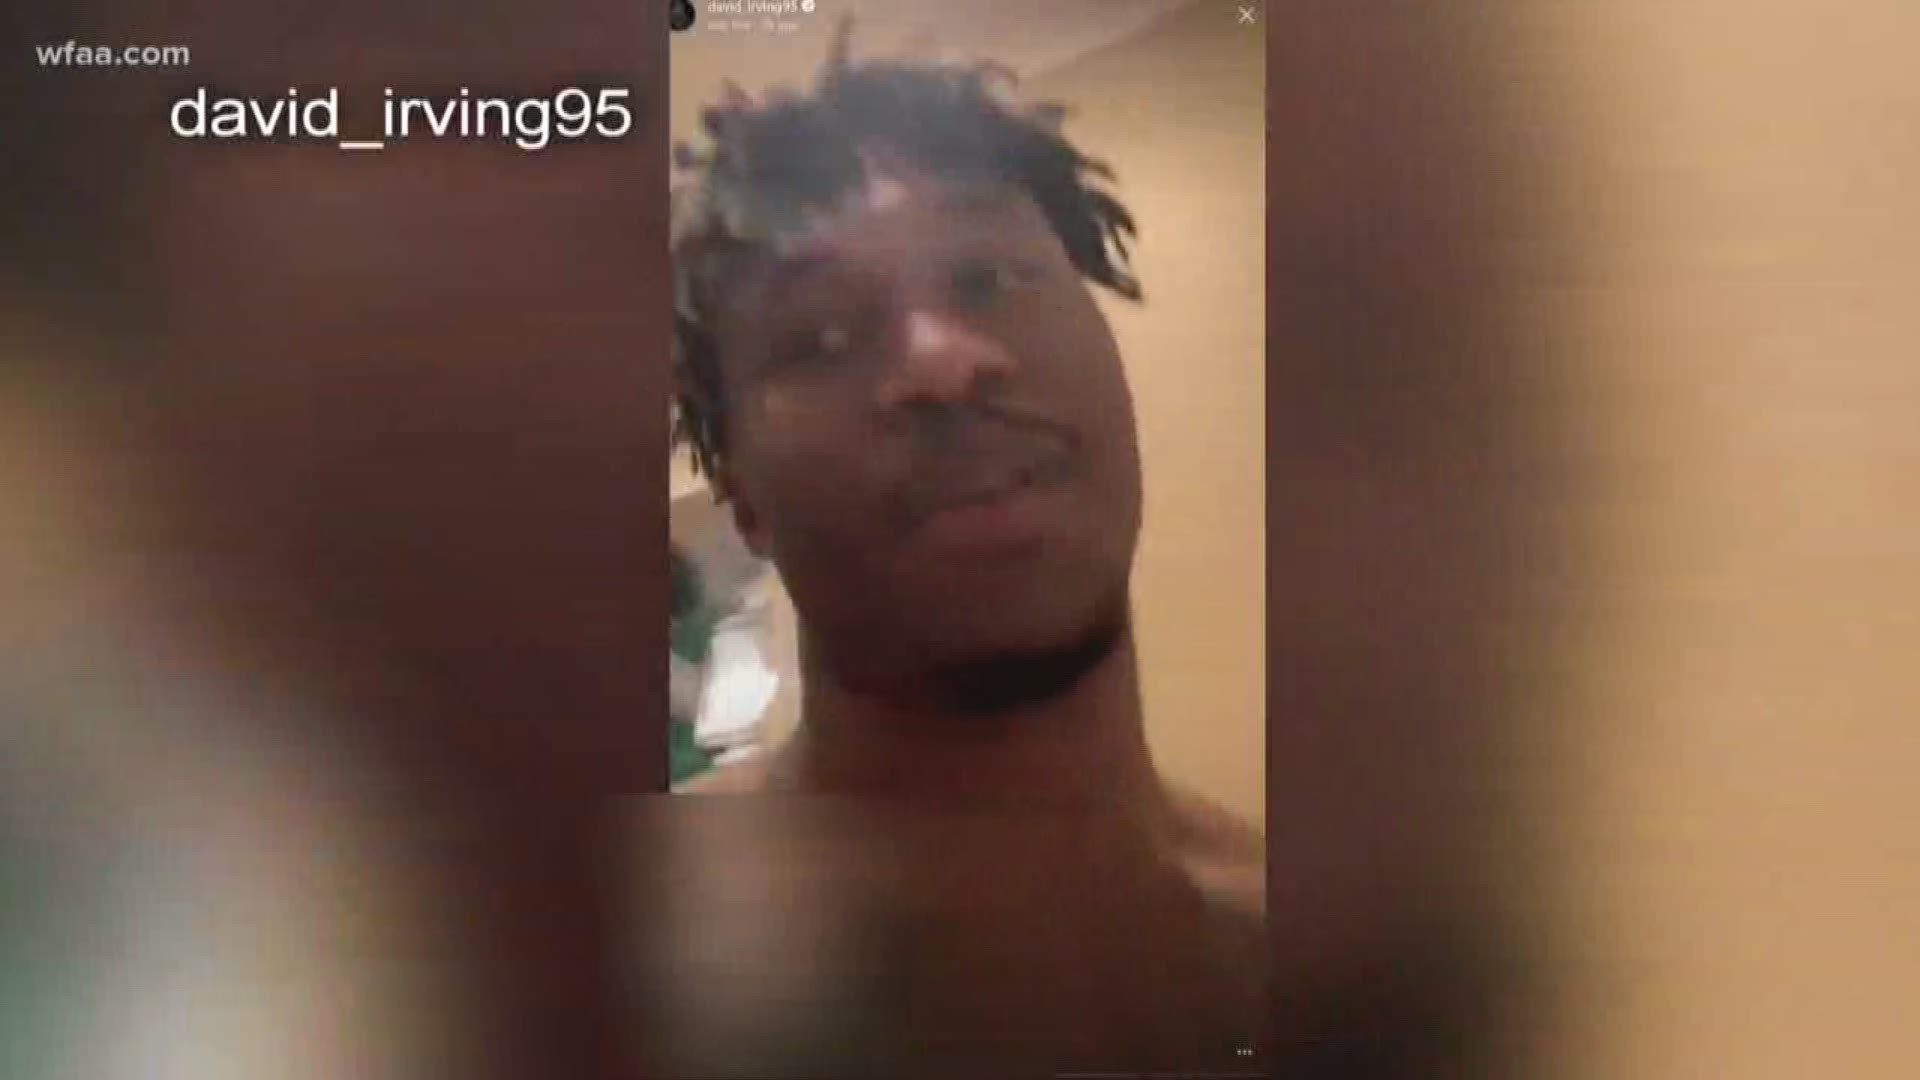 Cowboys' David Irving, while smoking, announces on Instagram Live that he's quitting NFL